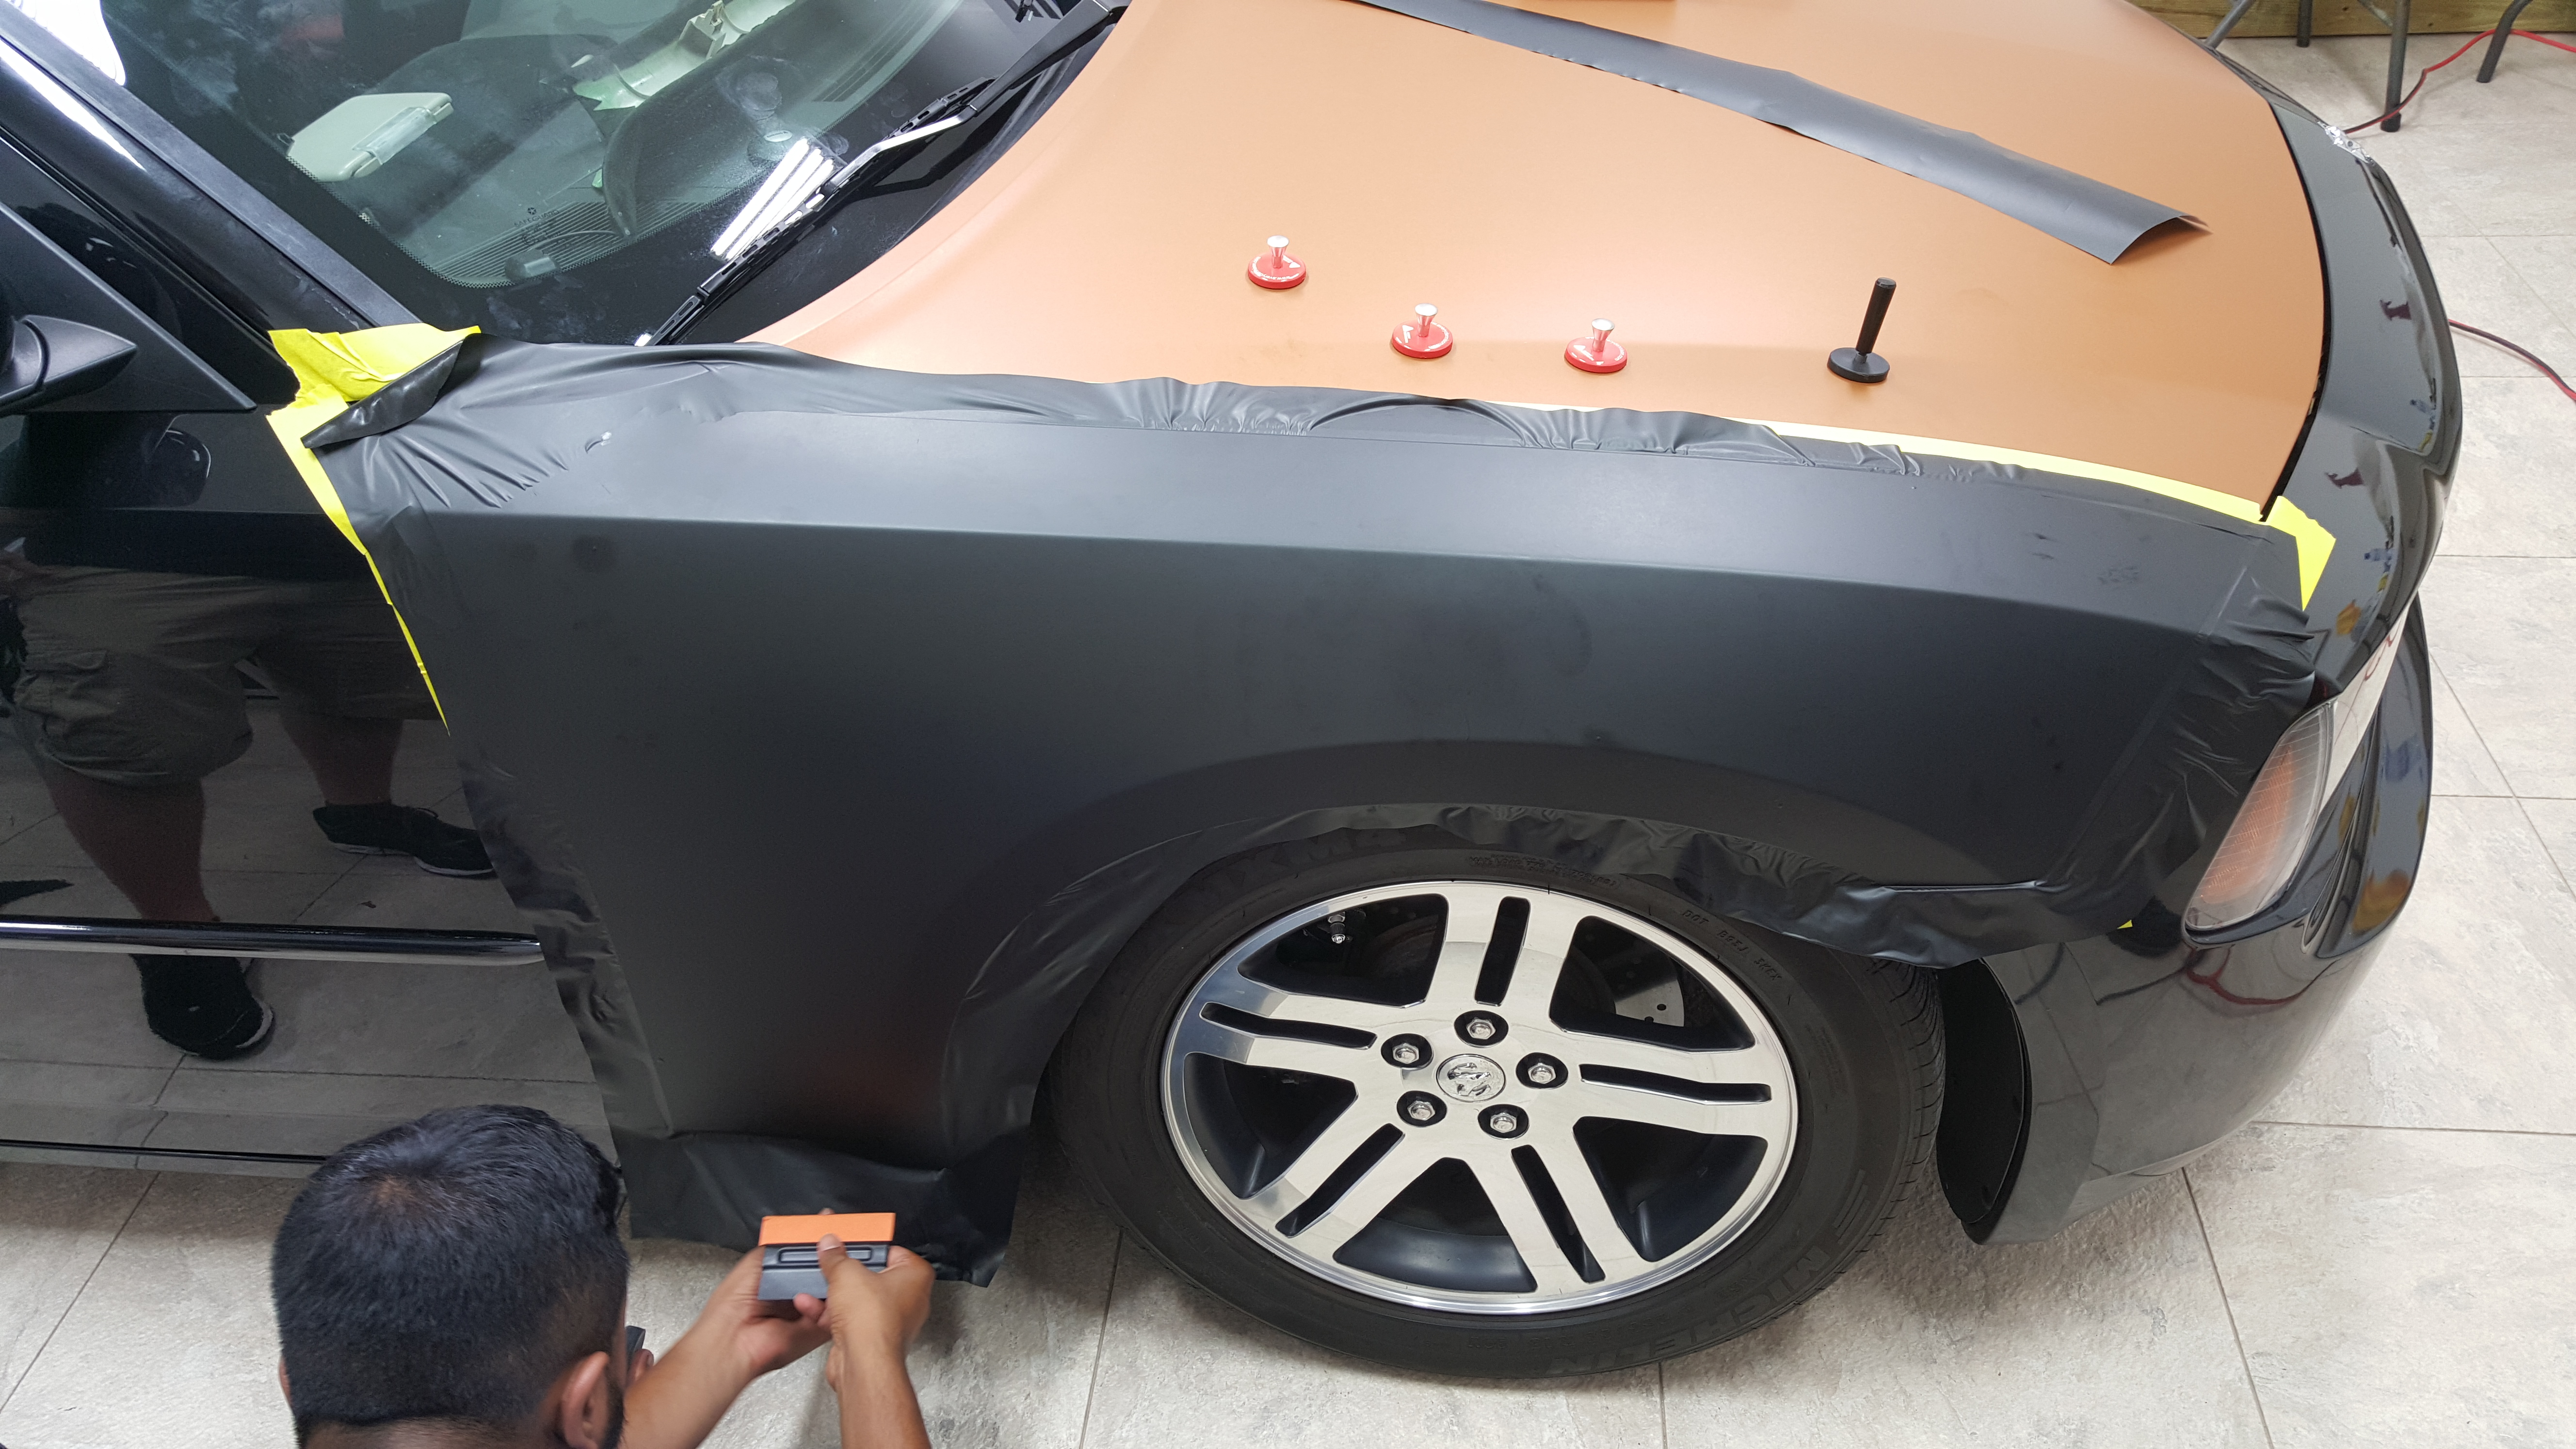 vinyl-wrapping-class-in-action-mobile-tech-training